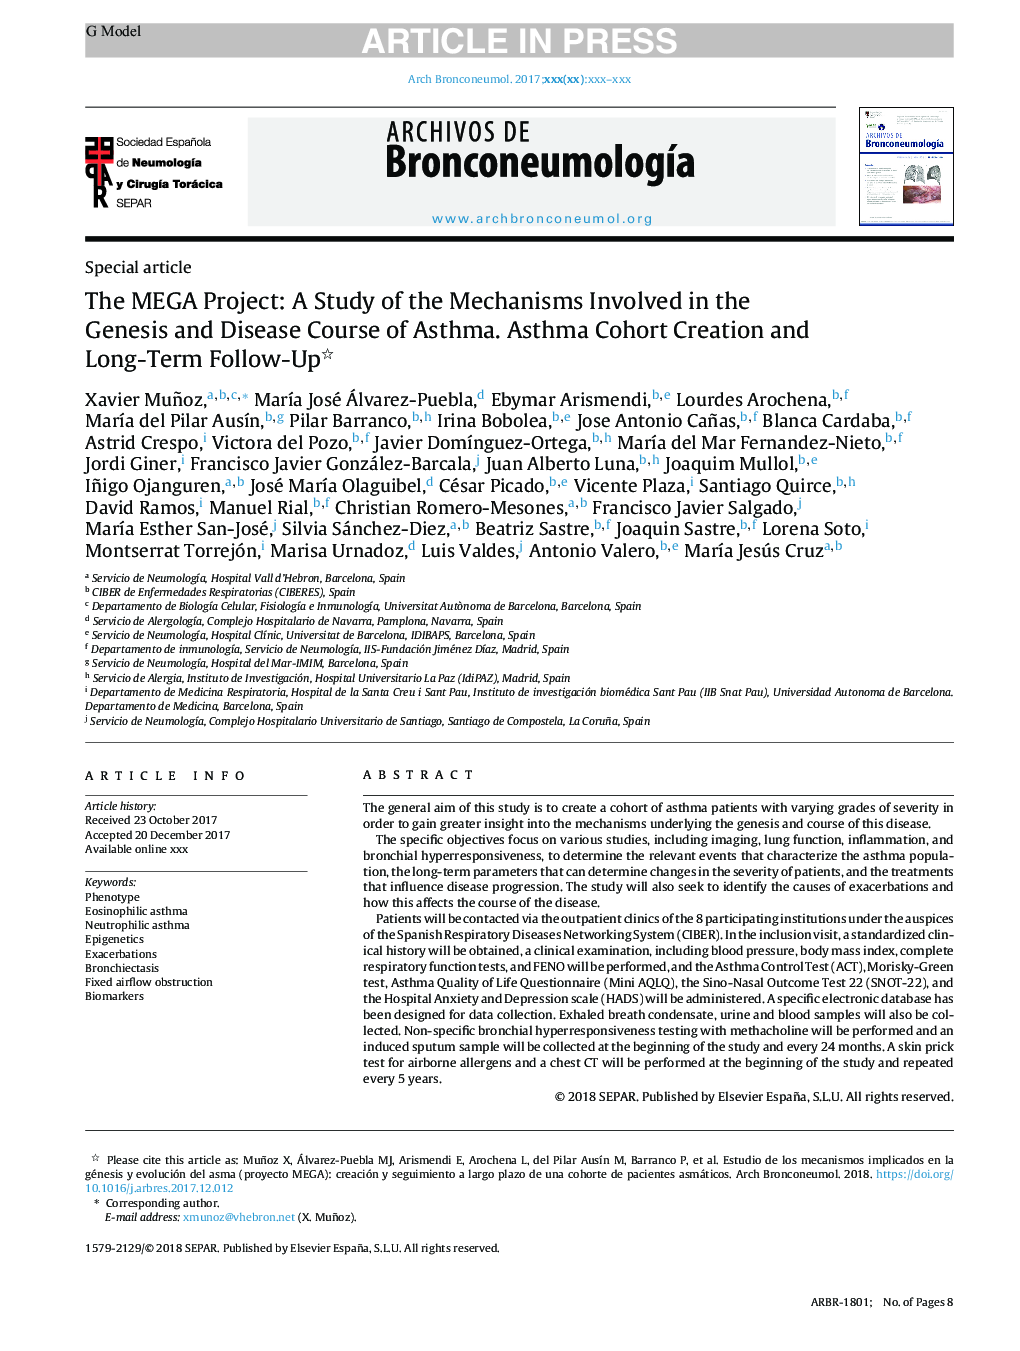 The MEGA Project: A Study of the Mechanisms Involved in the Genesis and Disease Course of Asthma. Asthma Cohort Creation and Long-Term Follow-Up